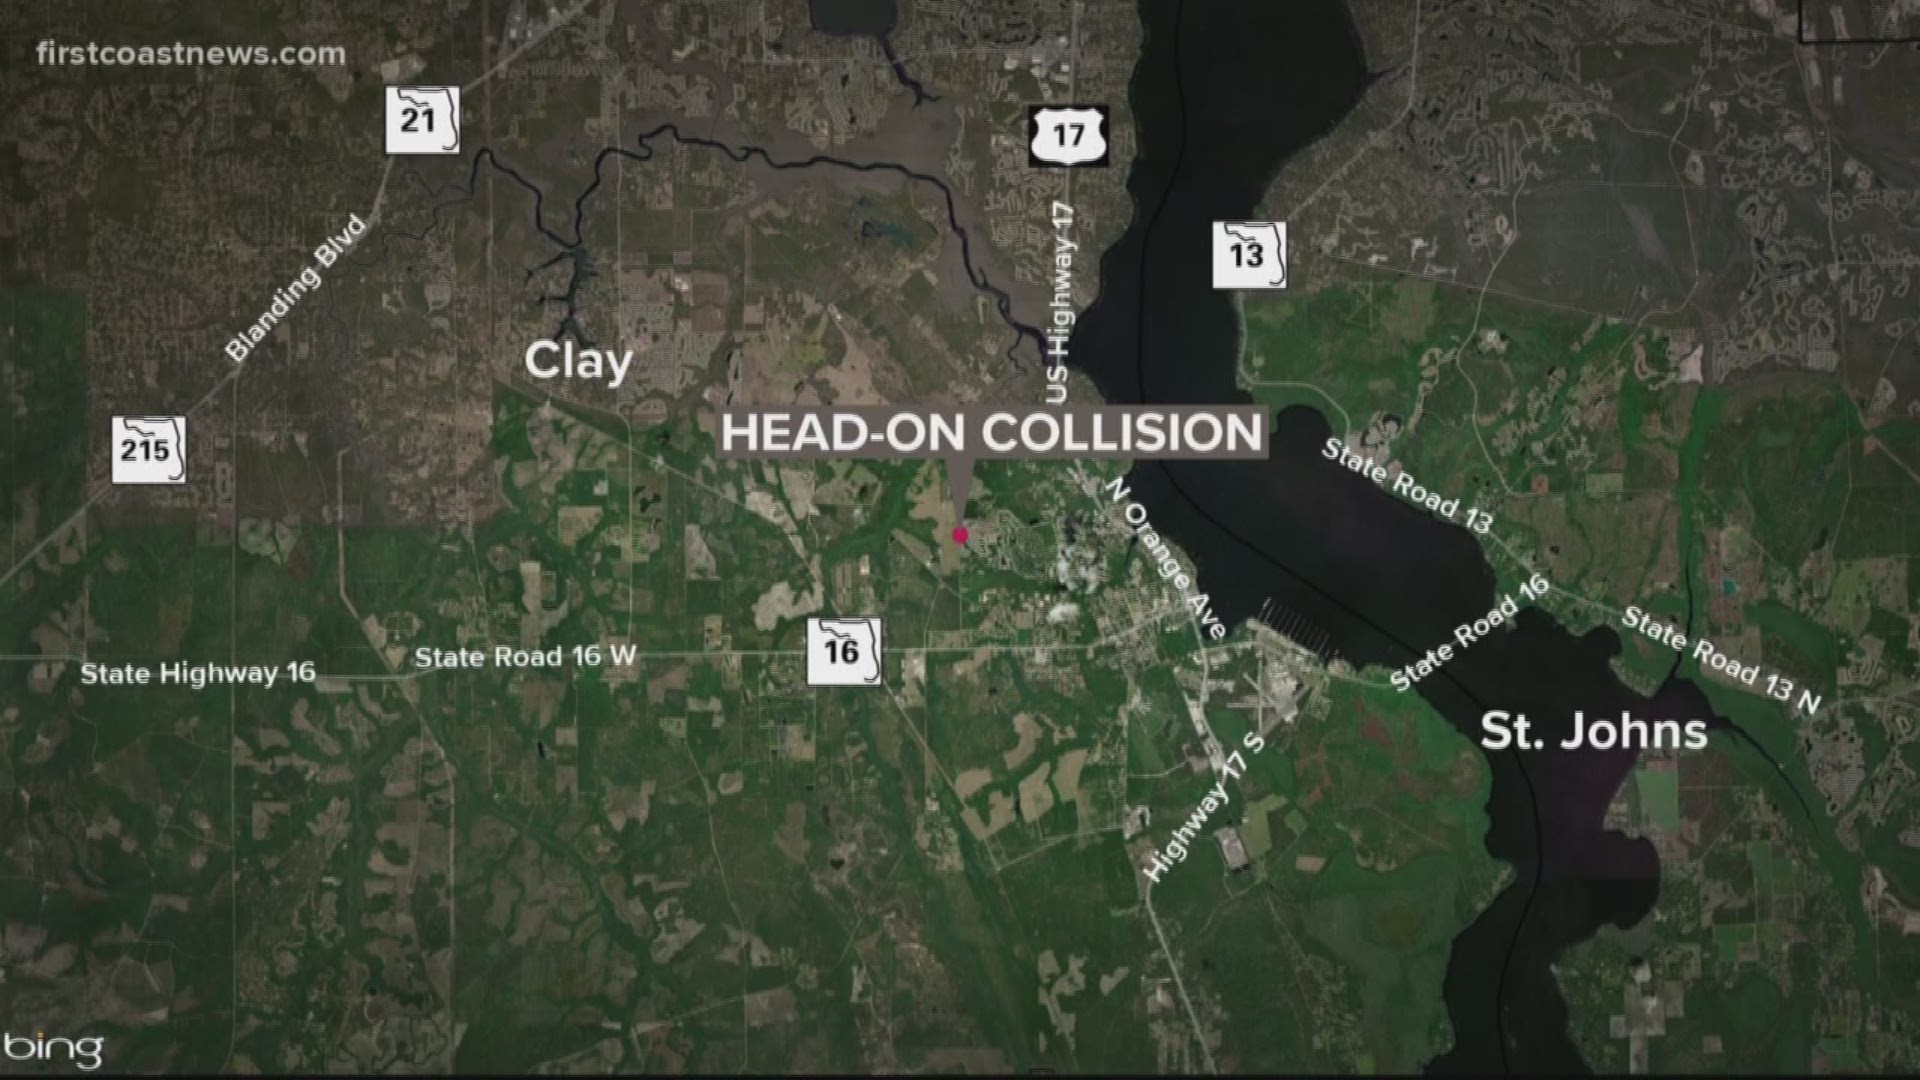 The Florida Highway Patrol says a driver crossed over the centerline and struck another vehicle Wednesday morning.